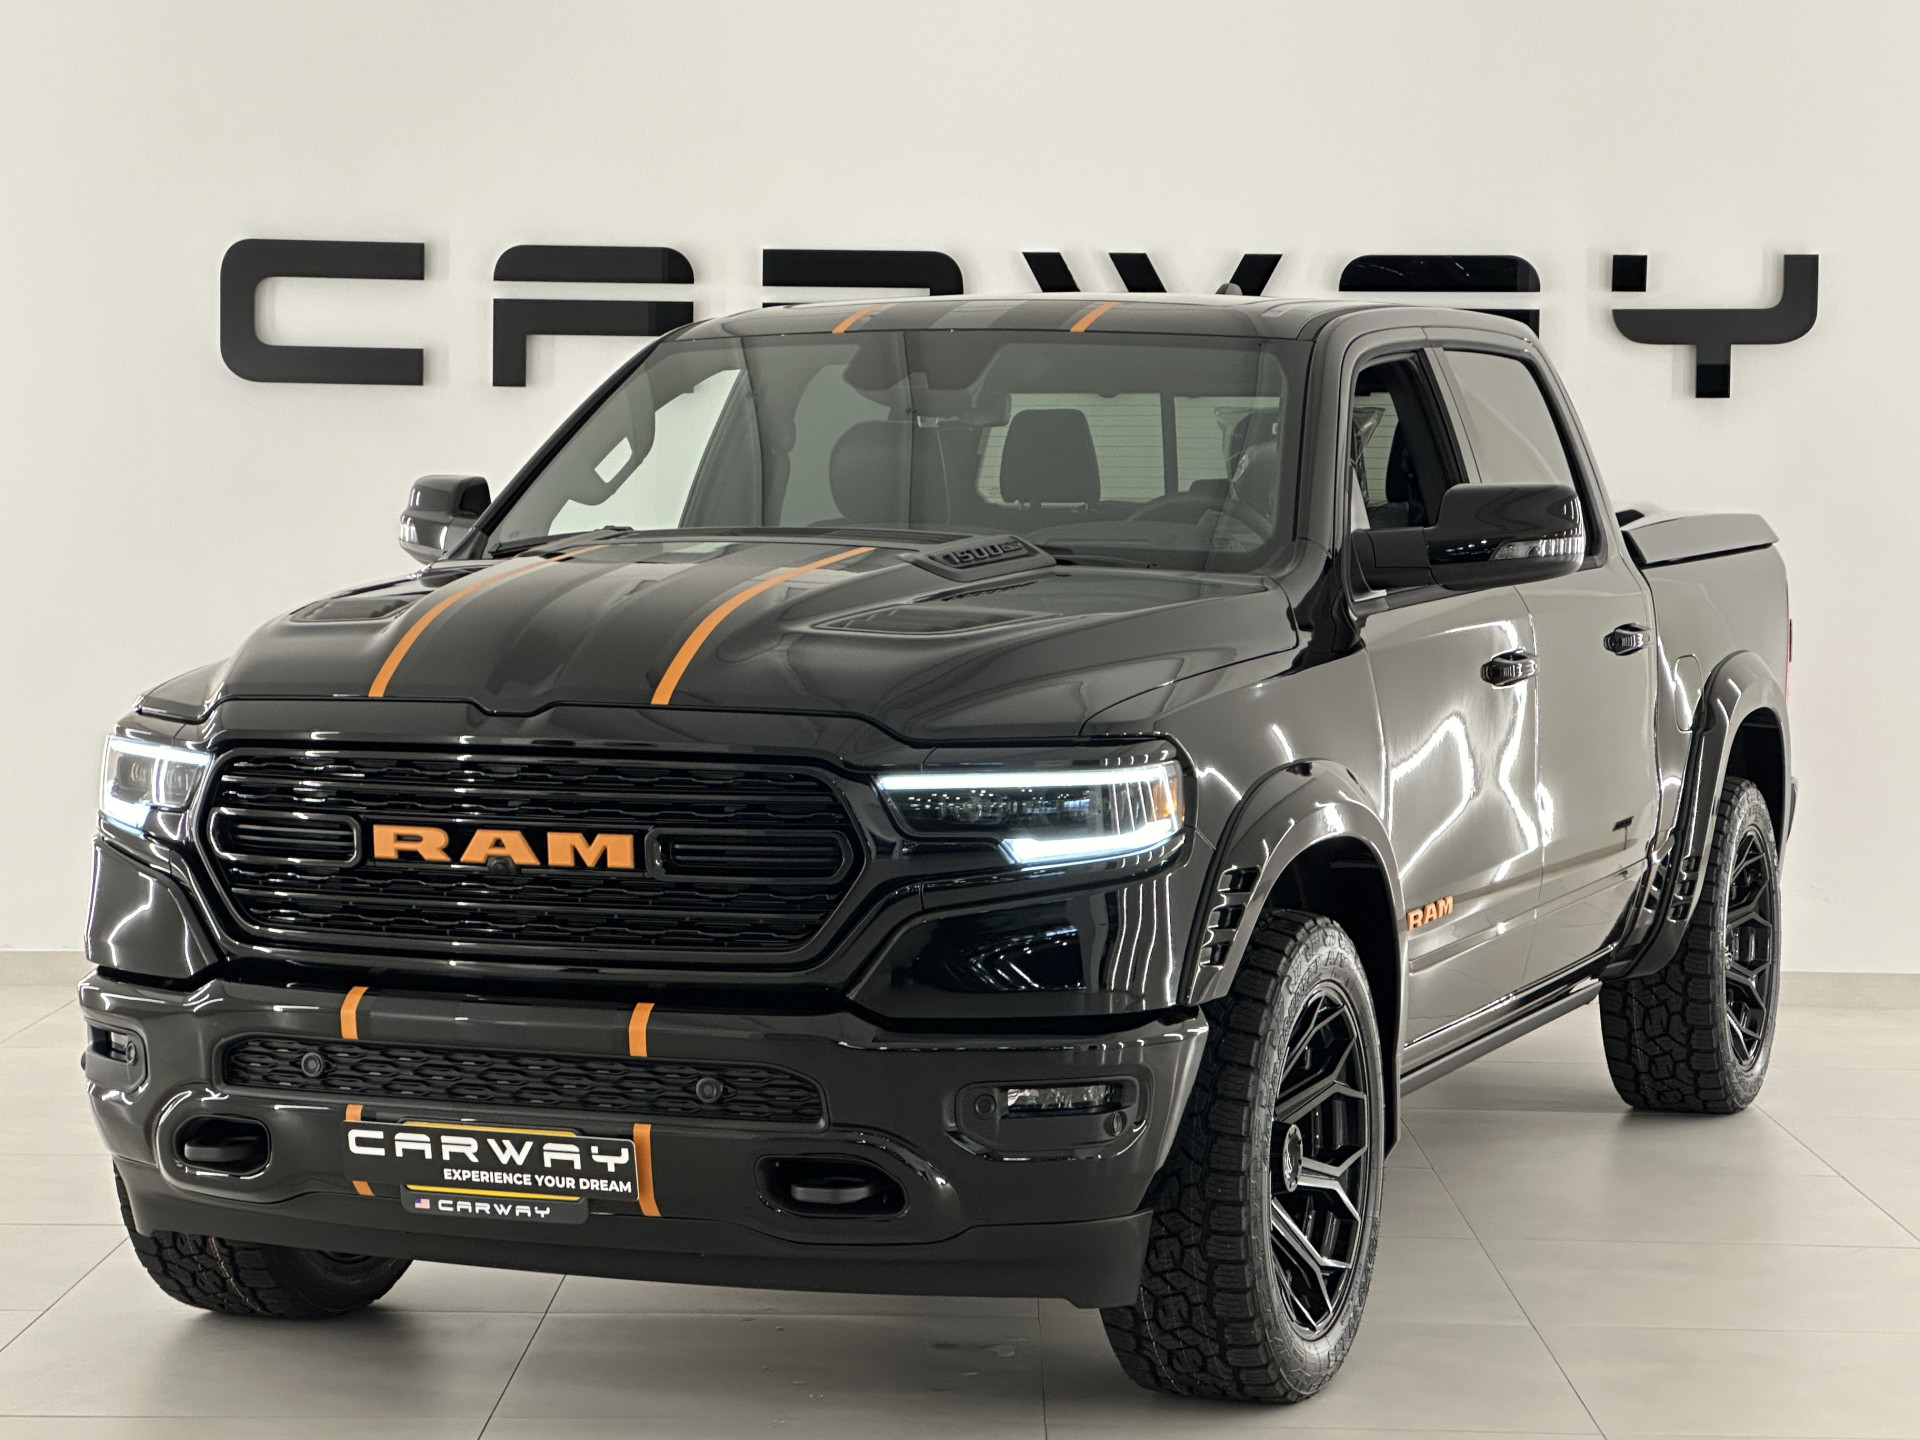 Dodge Ram Pick-Up 1500 5.7 V8 Limited Widebody Carway Edition